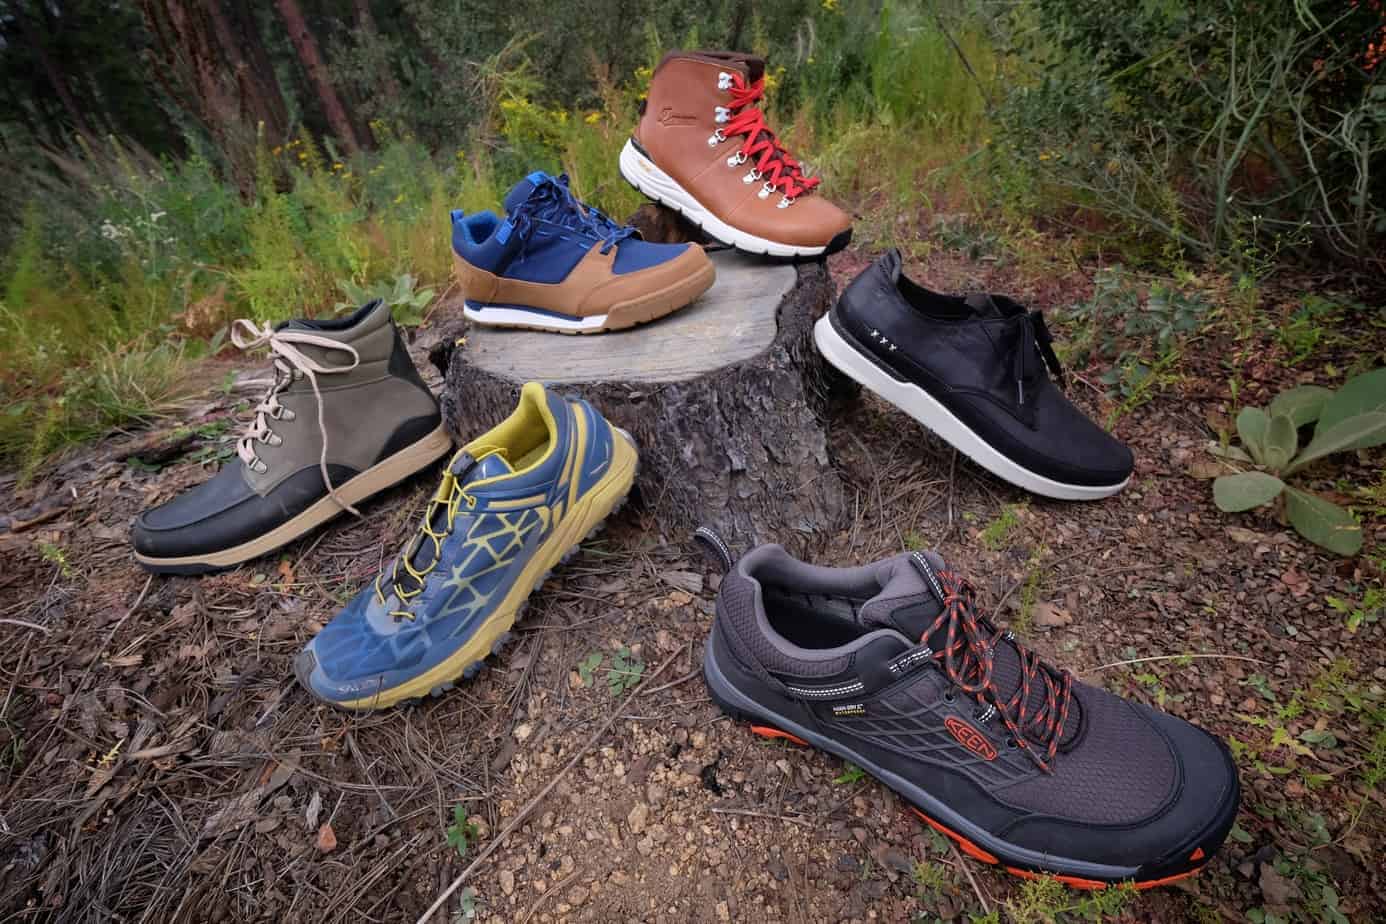 2017 Fall Boot and Shoe Roundup - Expedition Portal